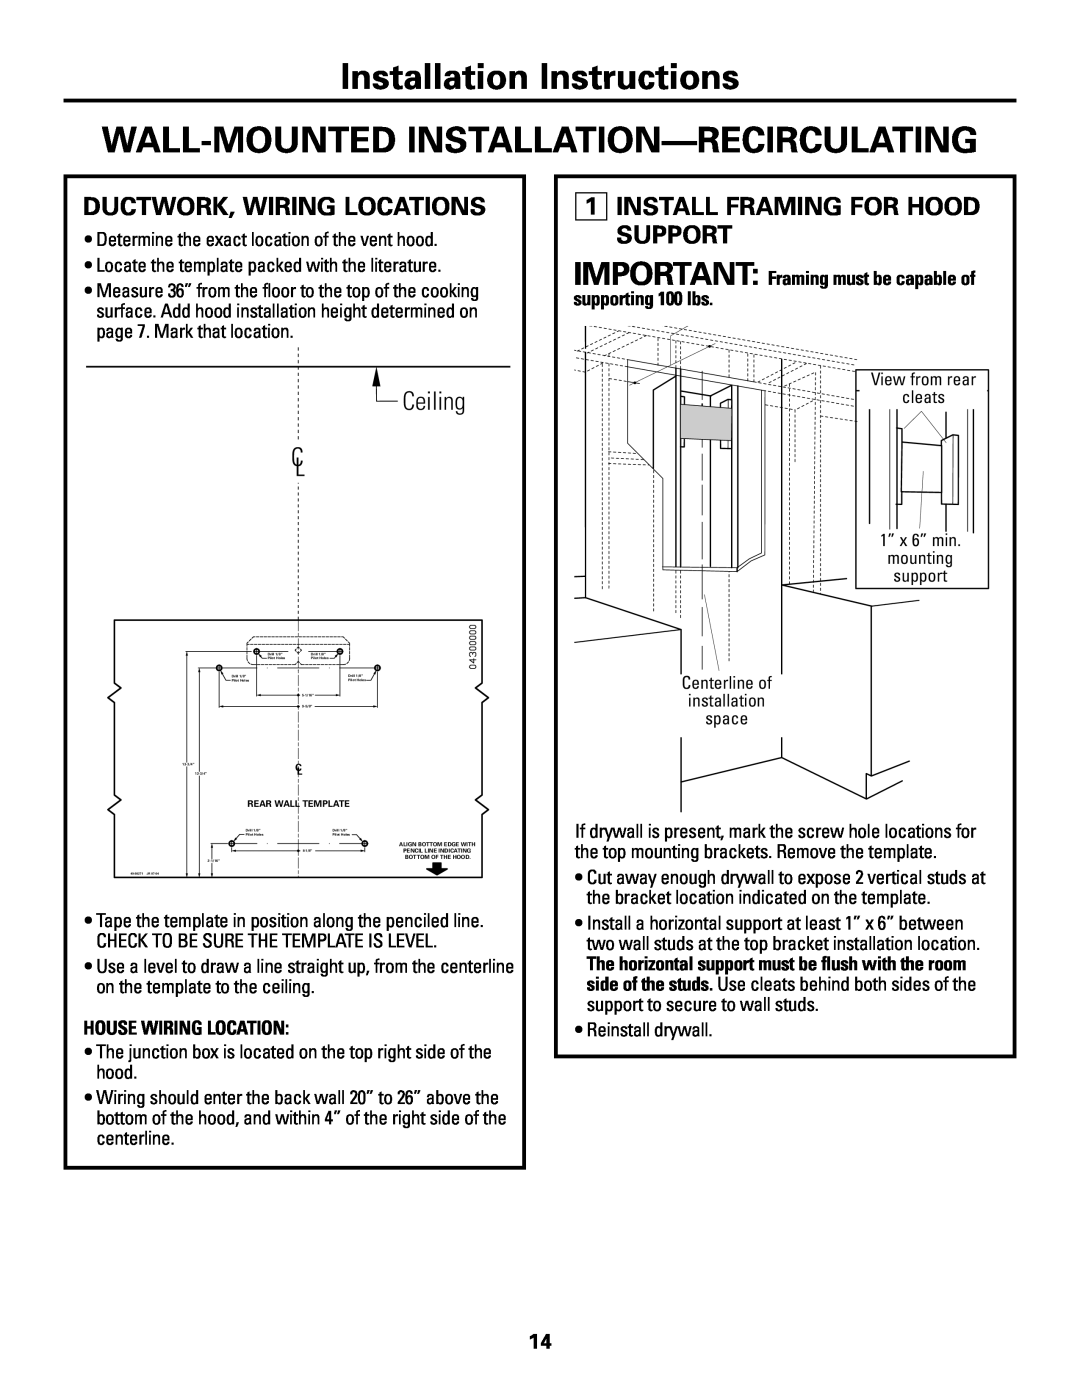 GE ZV800 Installation Instructions WALL-MOUNTED INSTALLATION-RECIRCULATING, Ceiling, Ductwork, Wiring Locations 